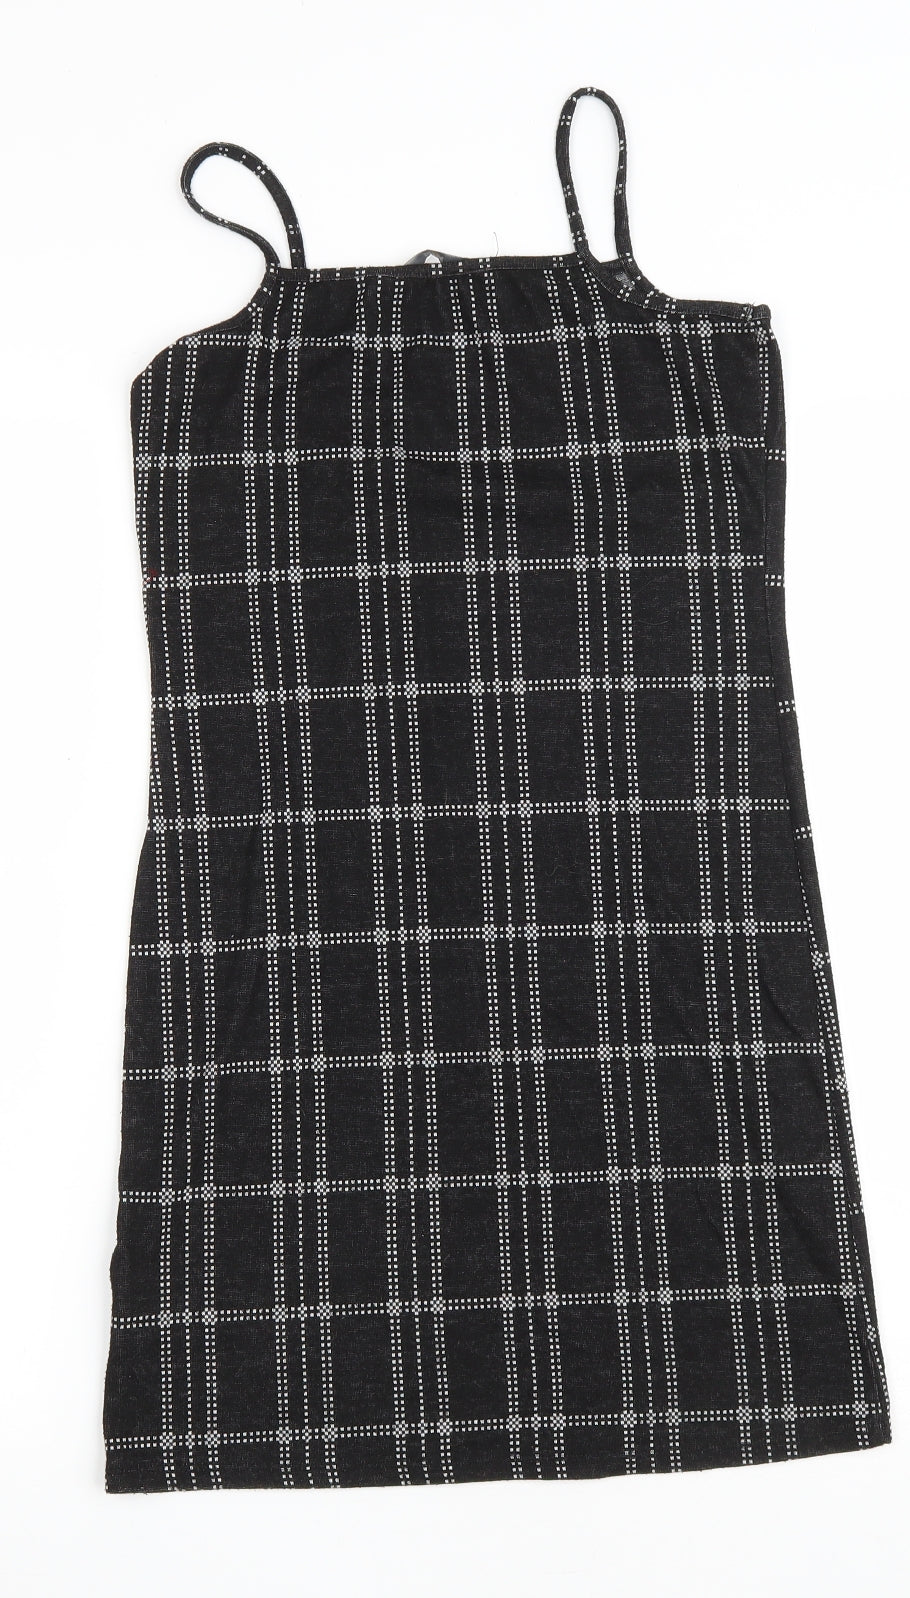 Miss E-Vie Girls Black Plaid Polyester Tank Dress Size 13-14 Years Square Neck Pullover